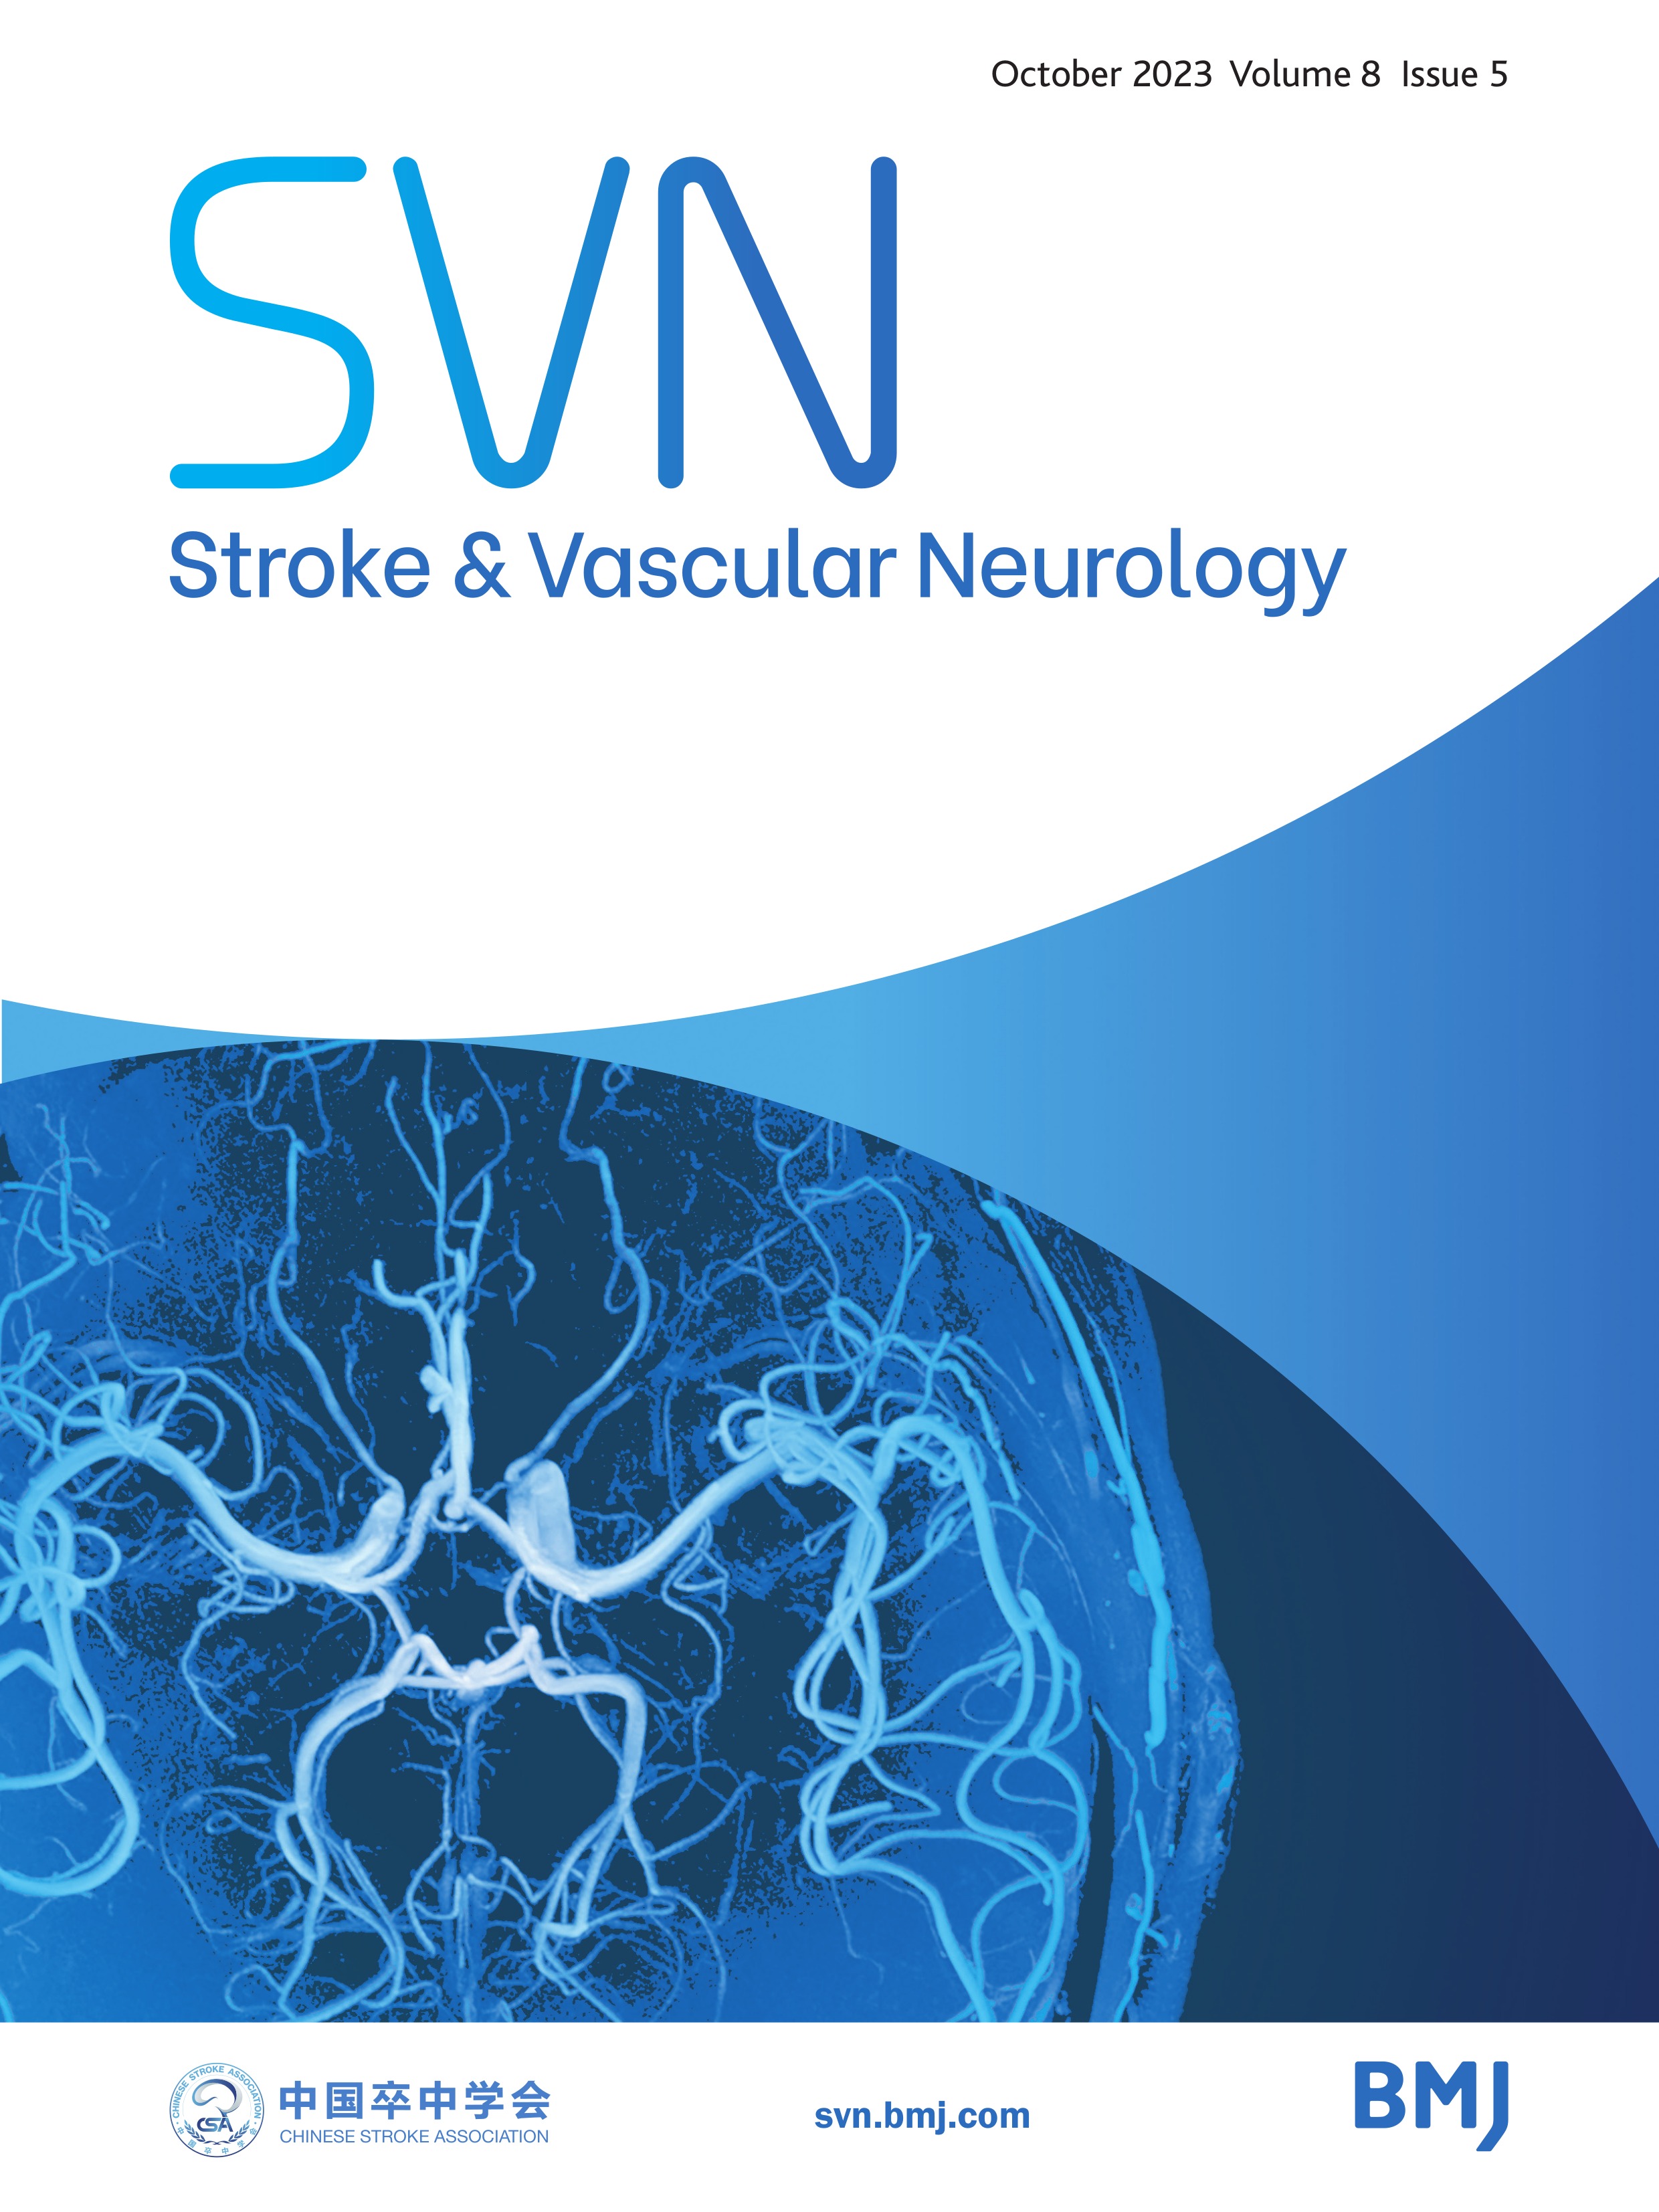 Characteristics of intracranial plaque in patients with non-cardioembolic stroke and intracranial large vessel occlusion